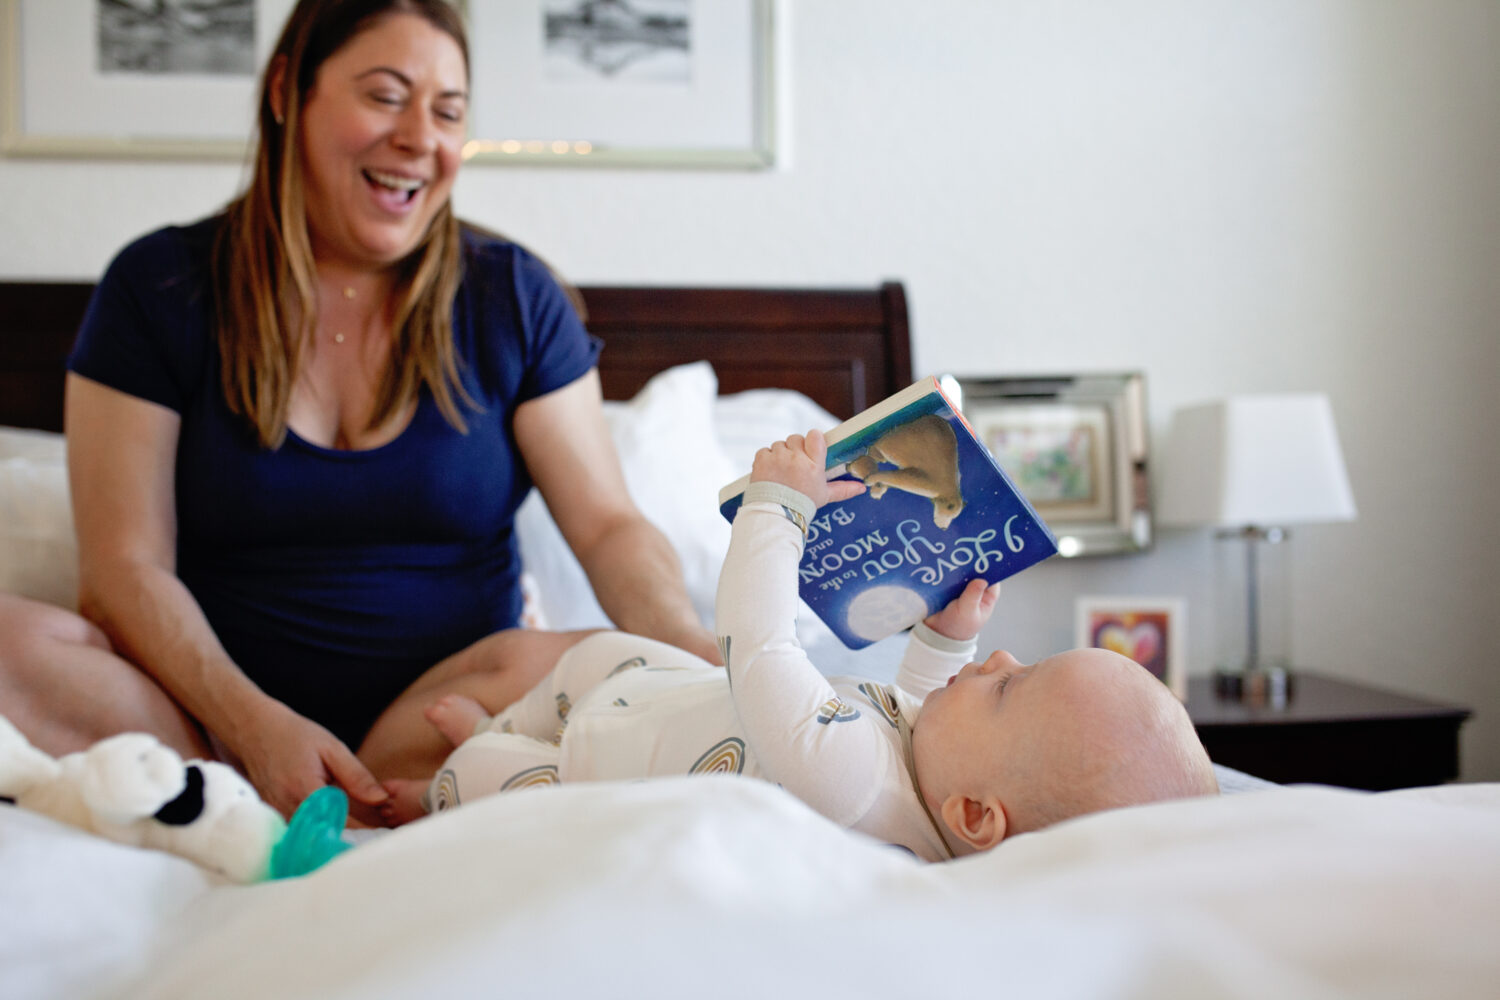 Baby examining book while mom laughs